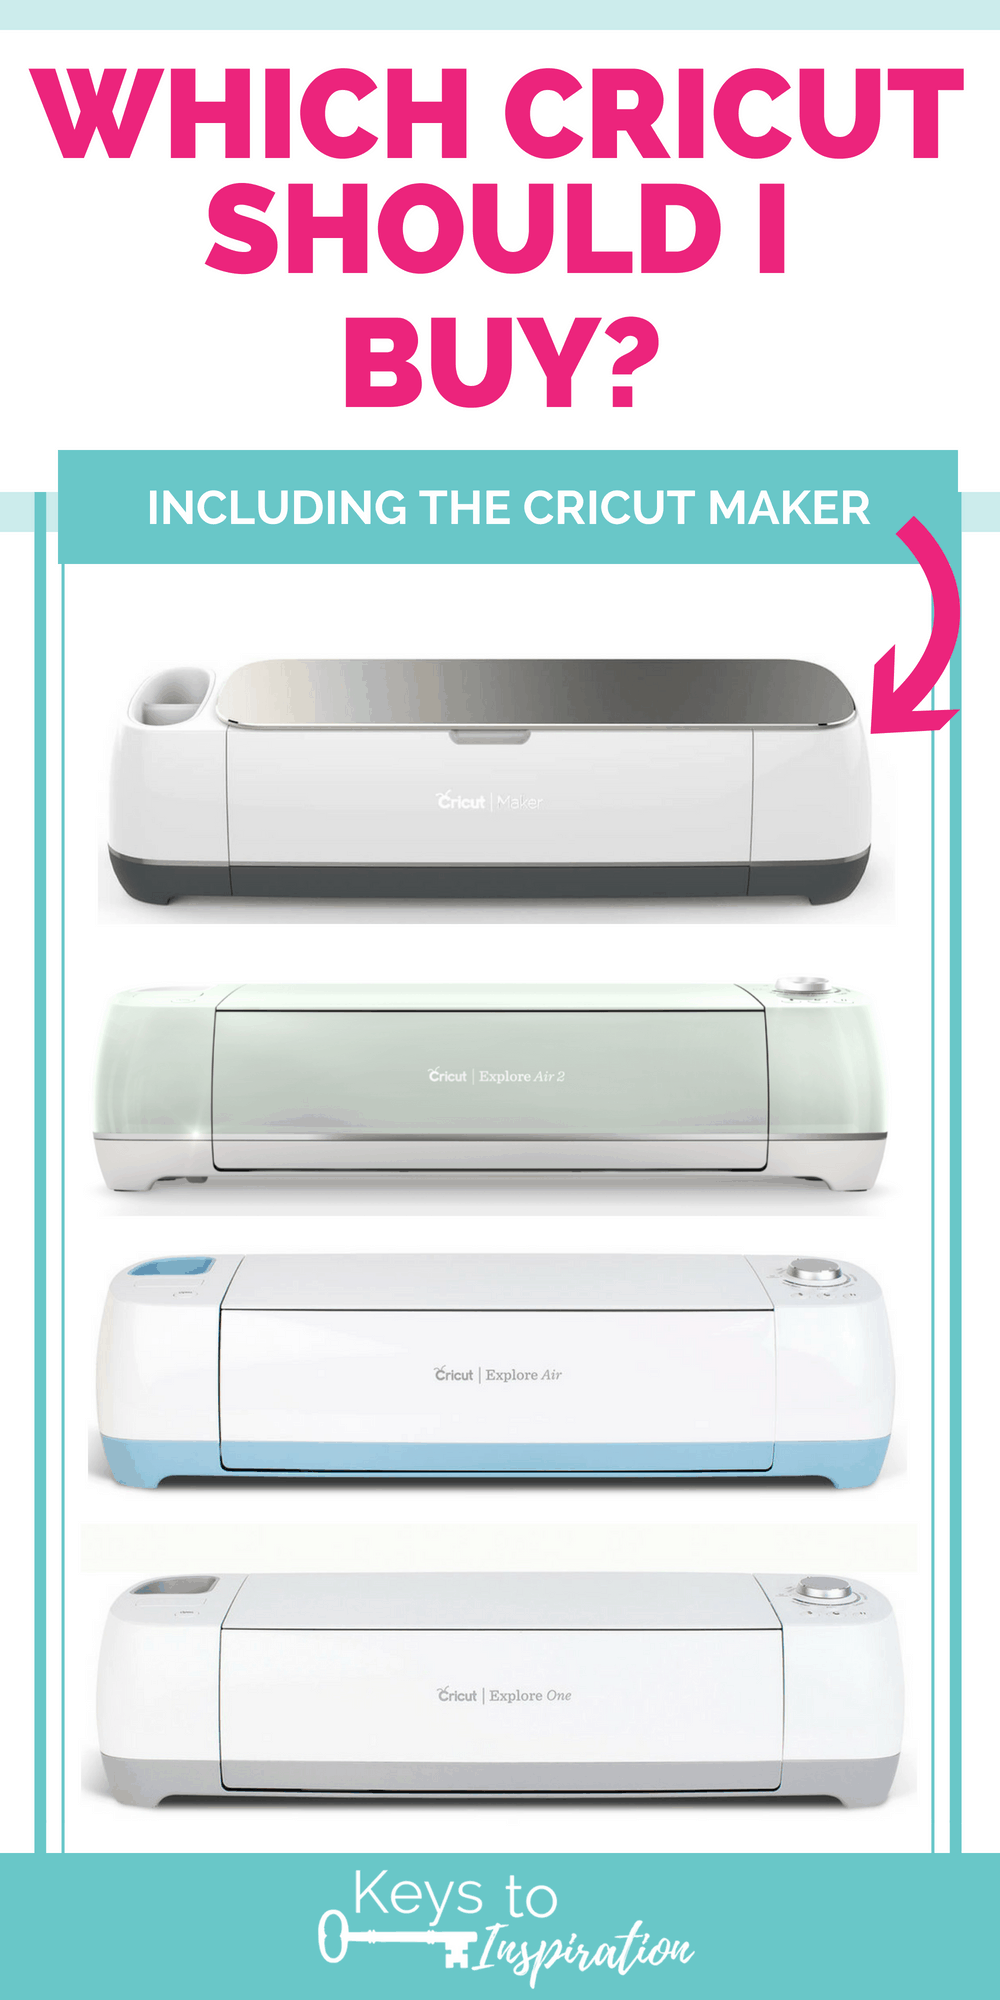 I'm in the process of purchasing my first cricut machine, and trying to  justify not buying the most expensive Maker 3. The only thing I need to  know is if the Cricut